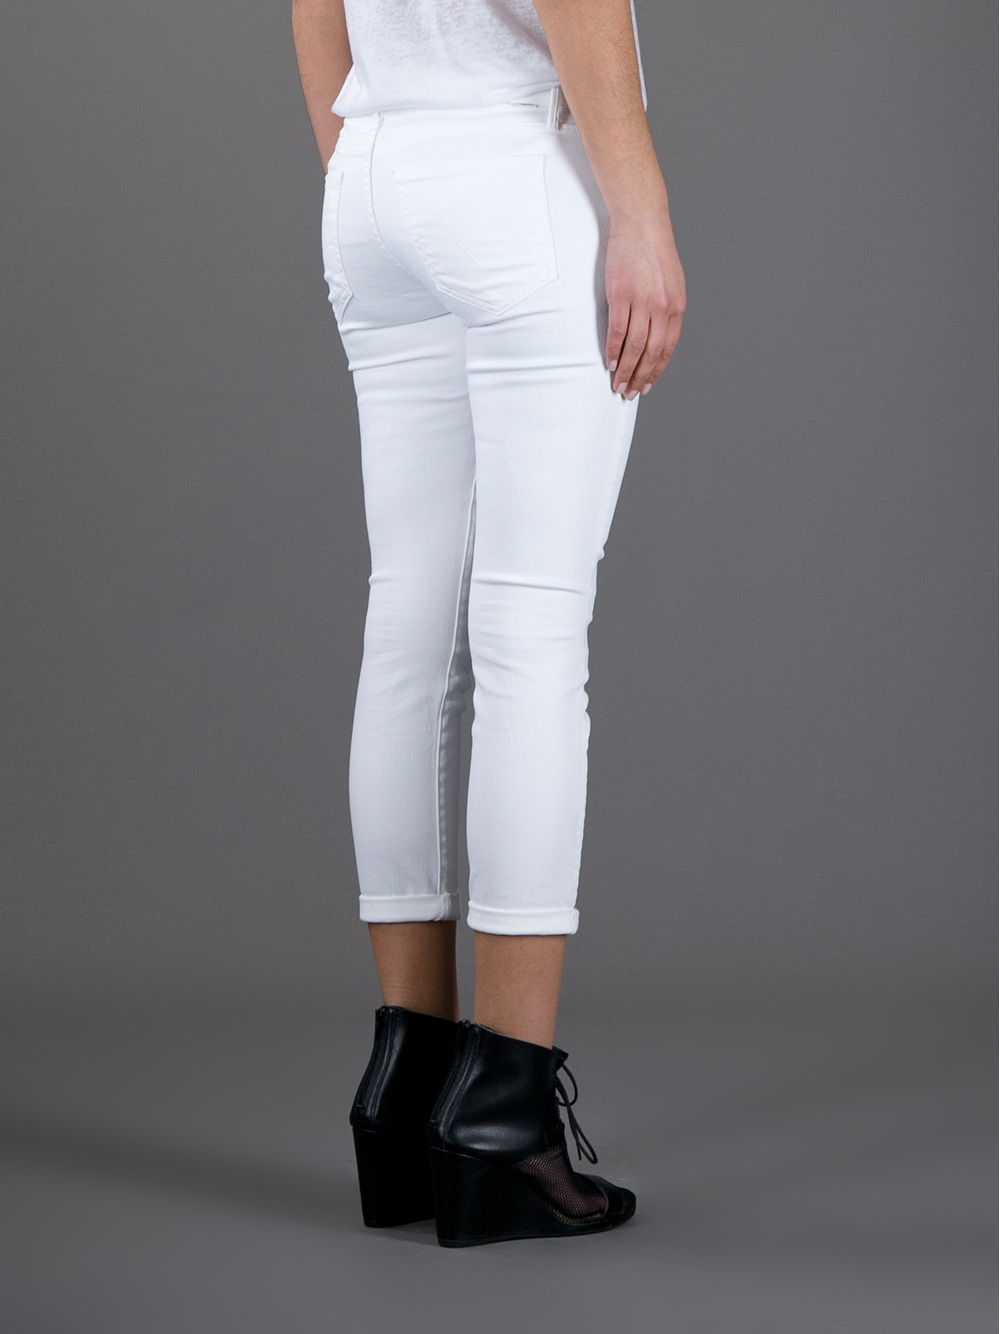 Lyst - Mother Cropped Jean in White